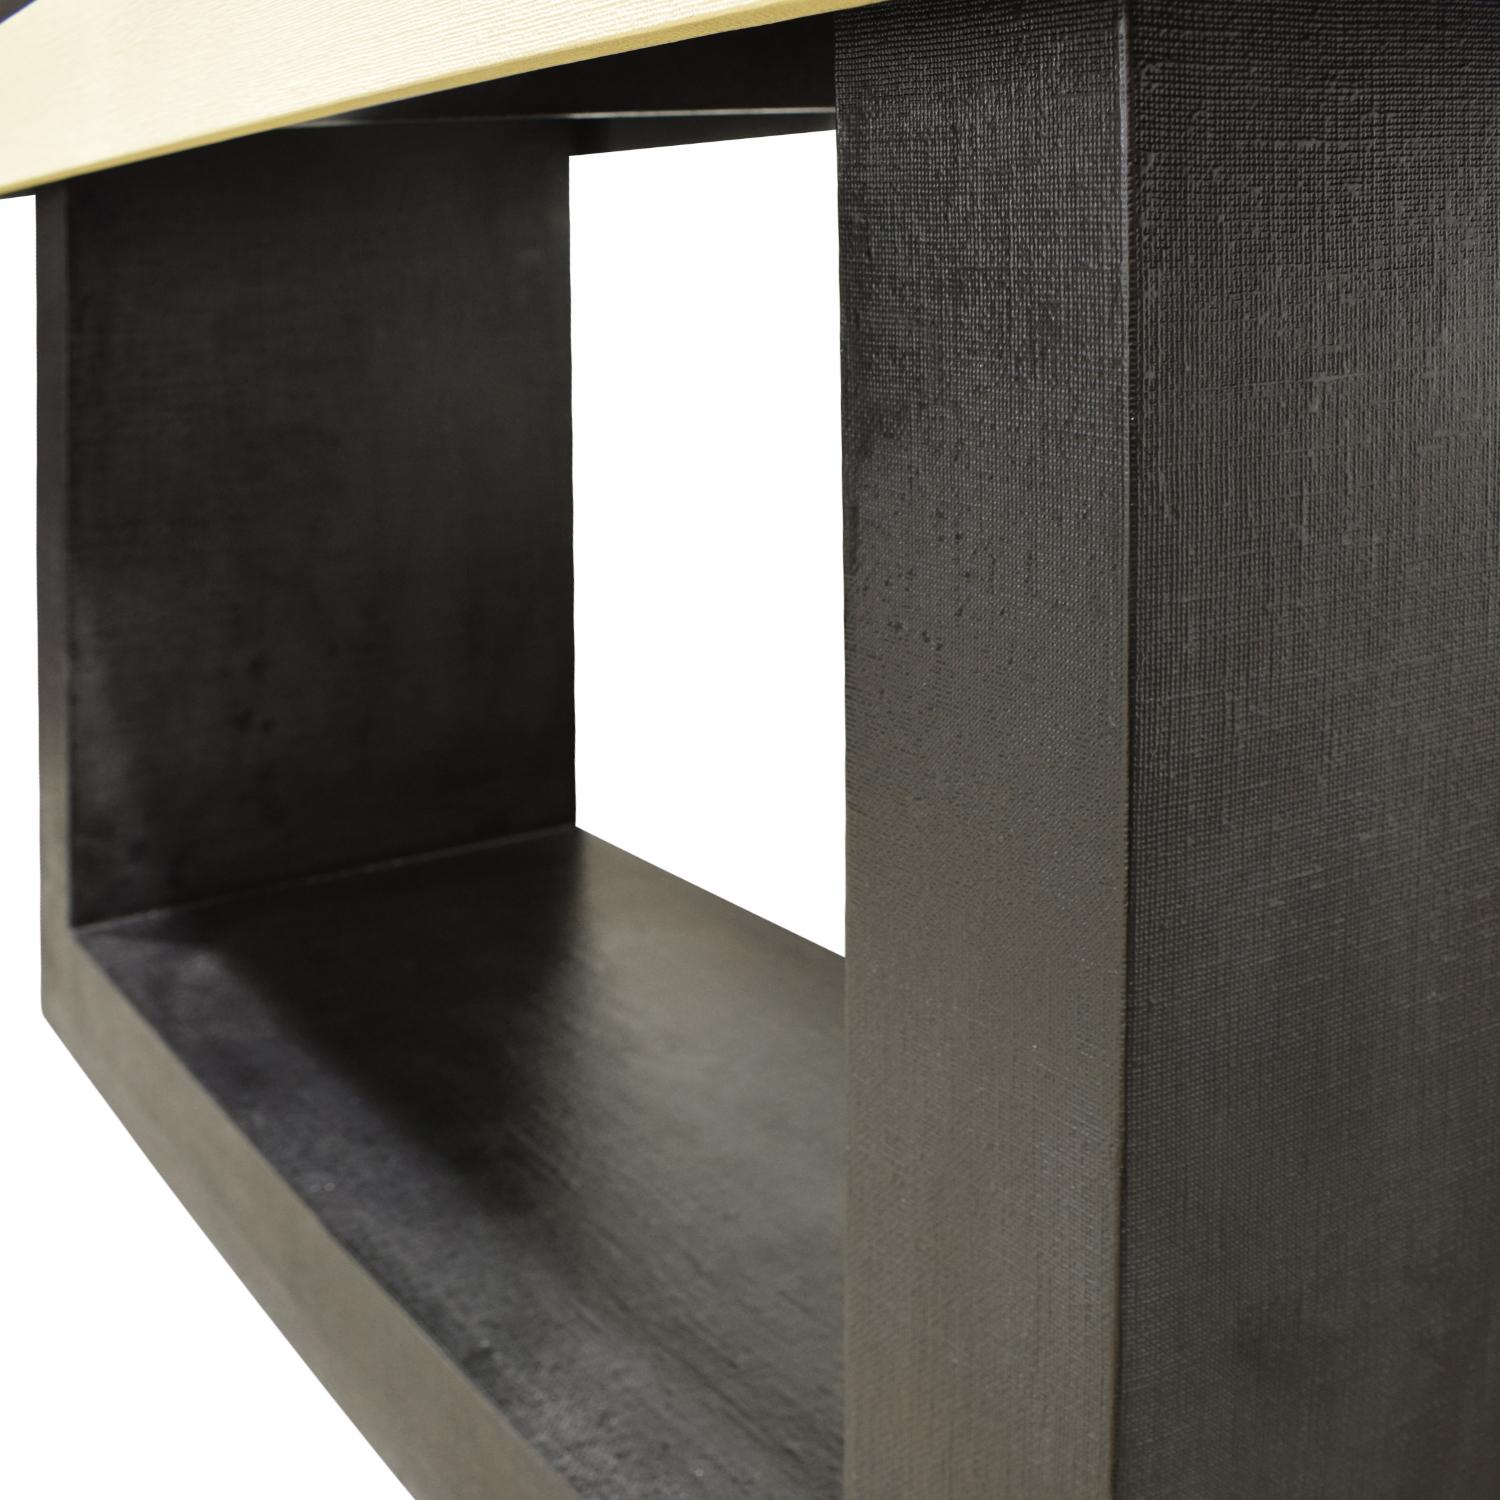 Mid-Century Modern Console Table in Lacquered Linen with Black Granite Top, 1970s For Sale